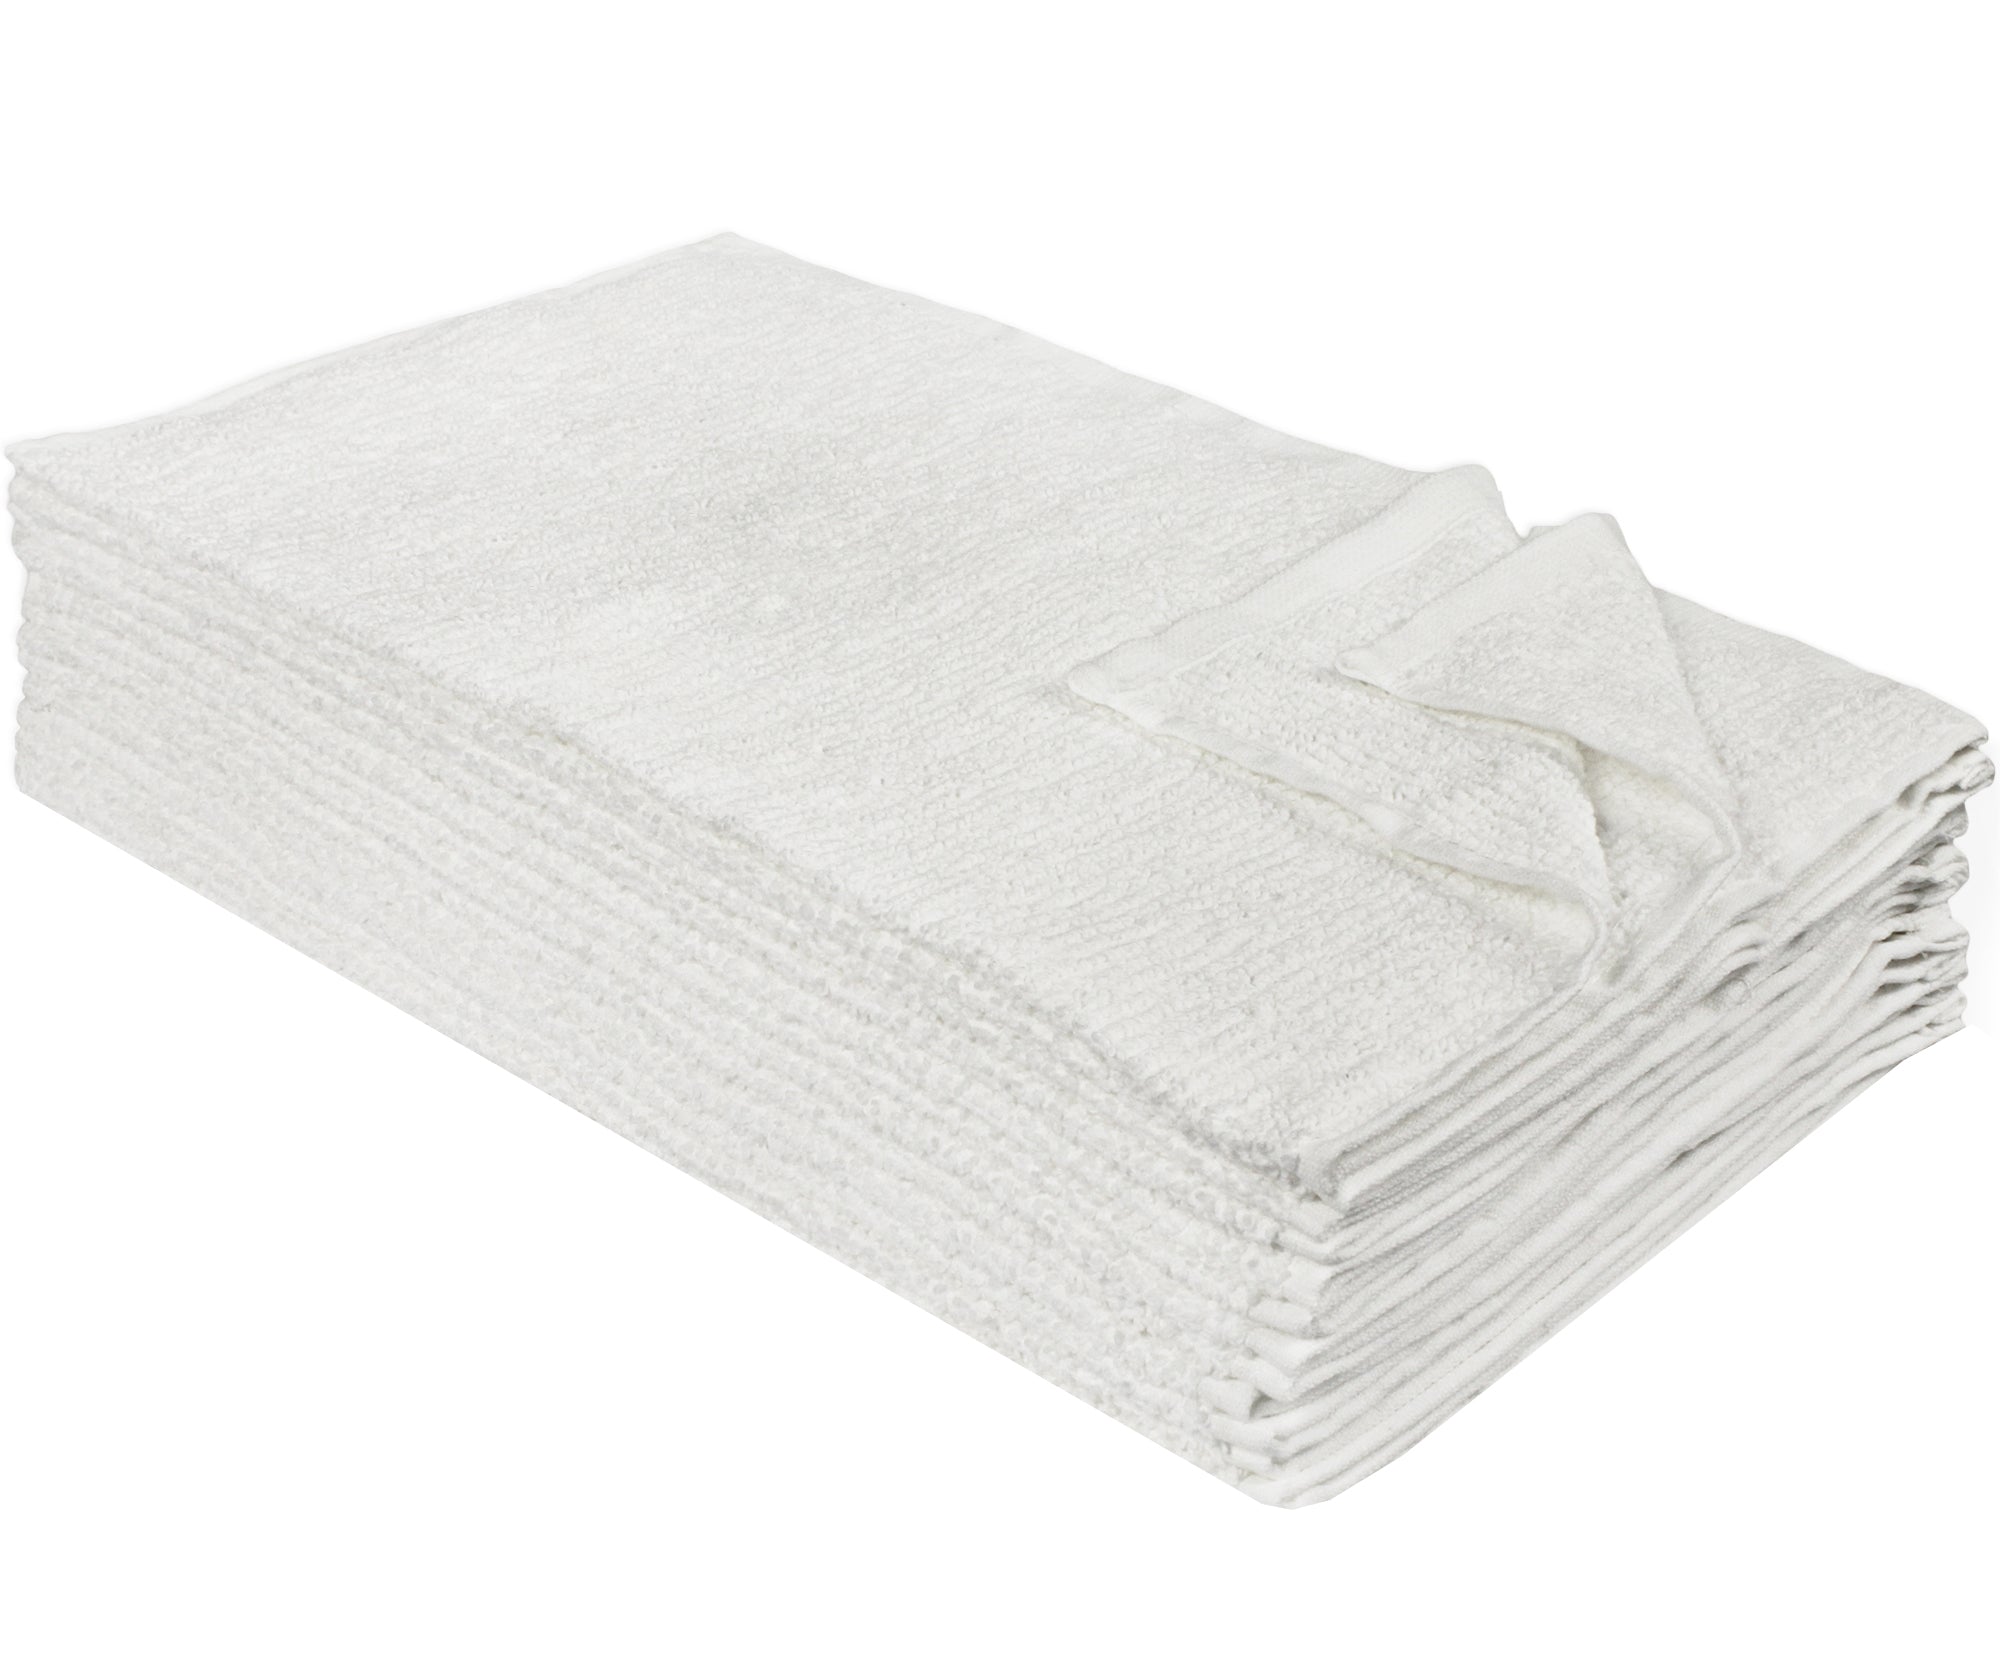 Ribbed Towel White